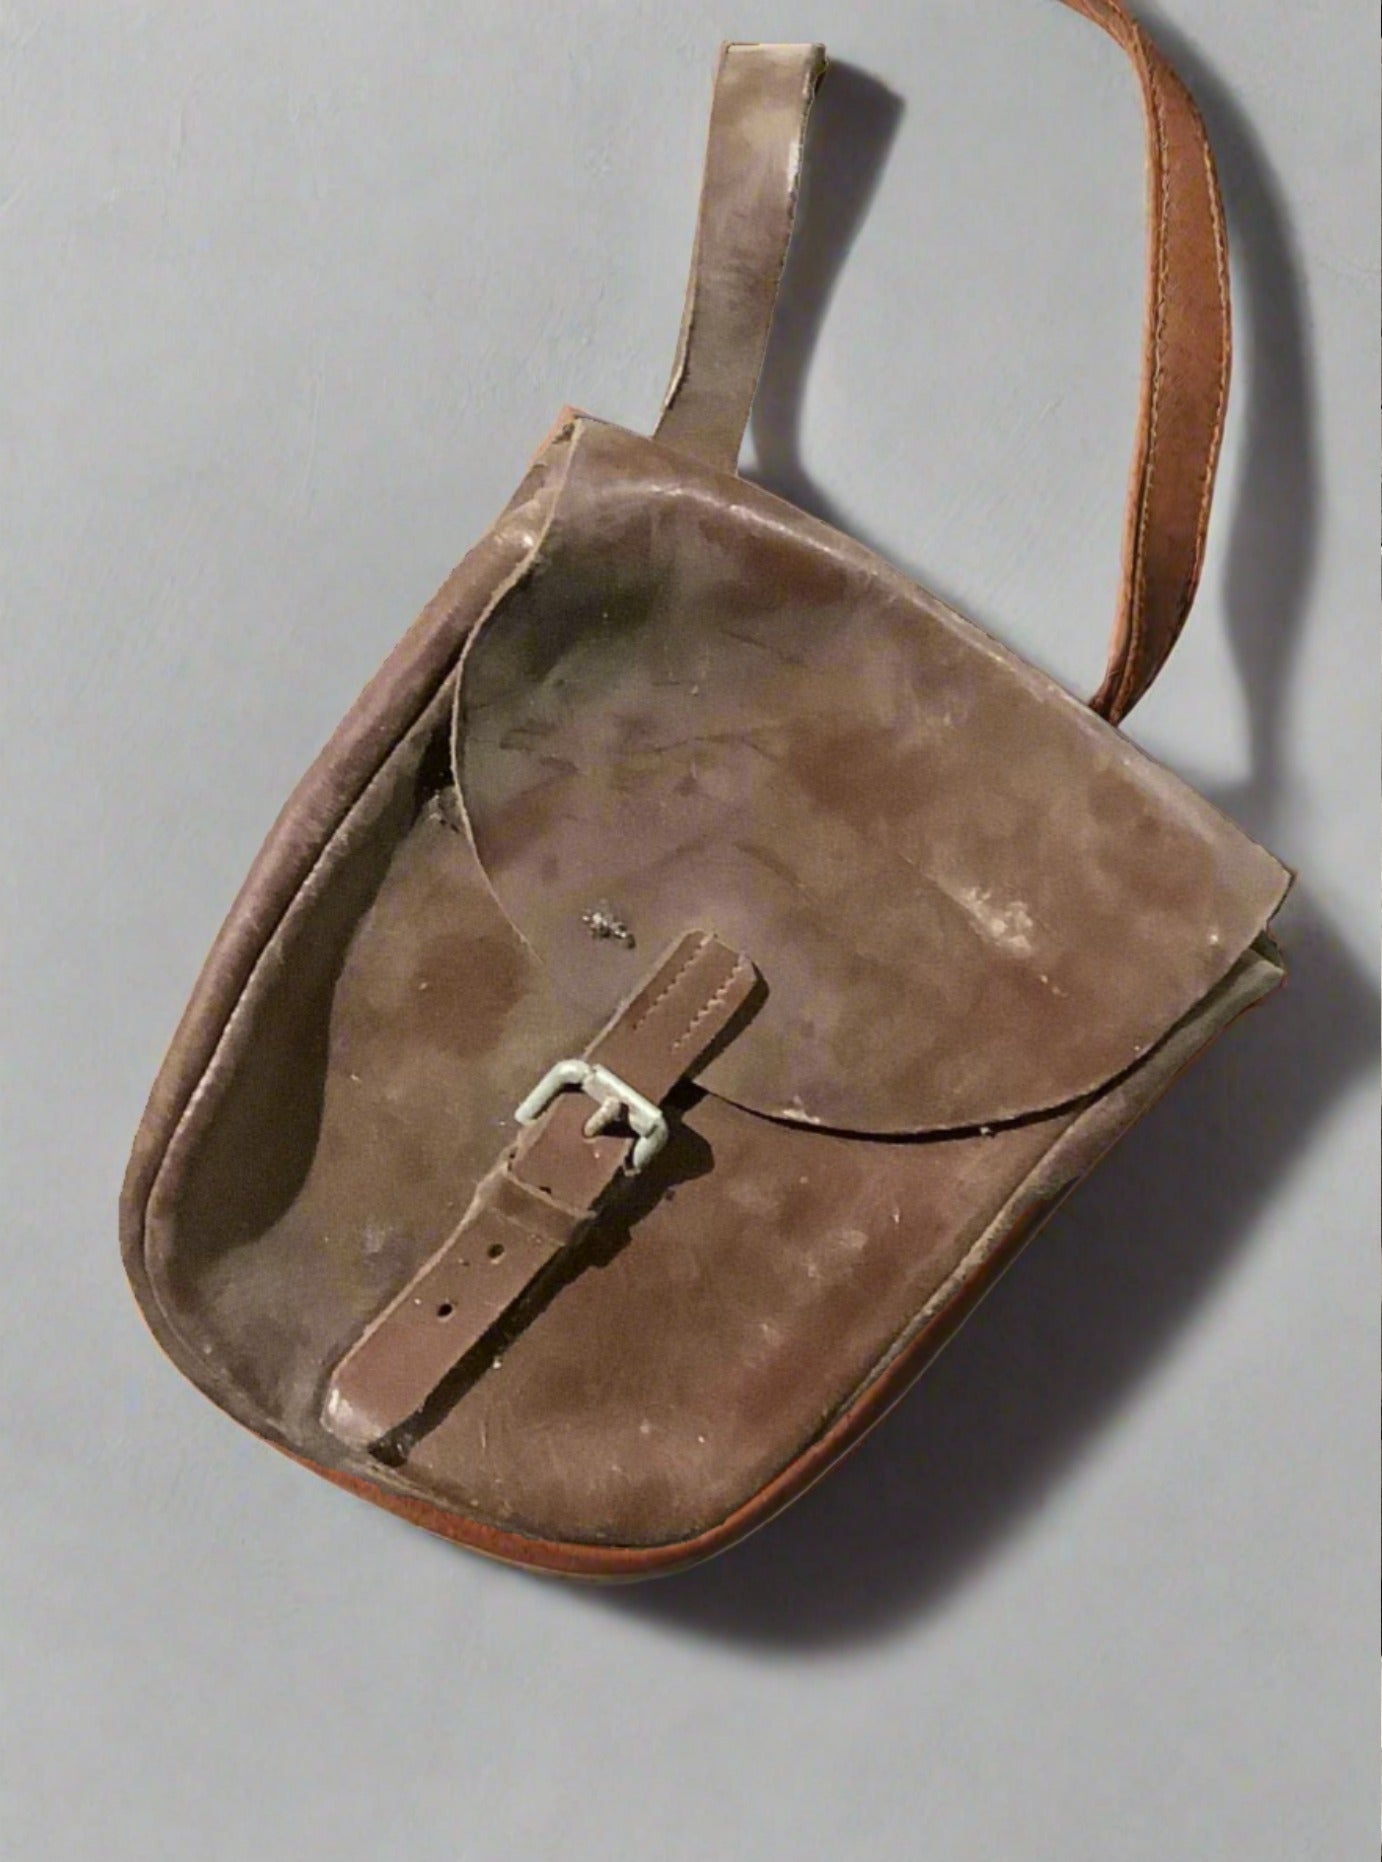 Small leather saddle bag with a buckled close and carrying strap.